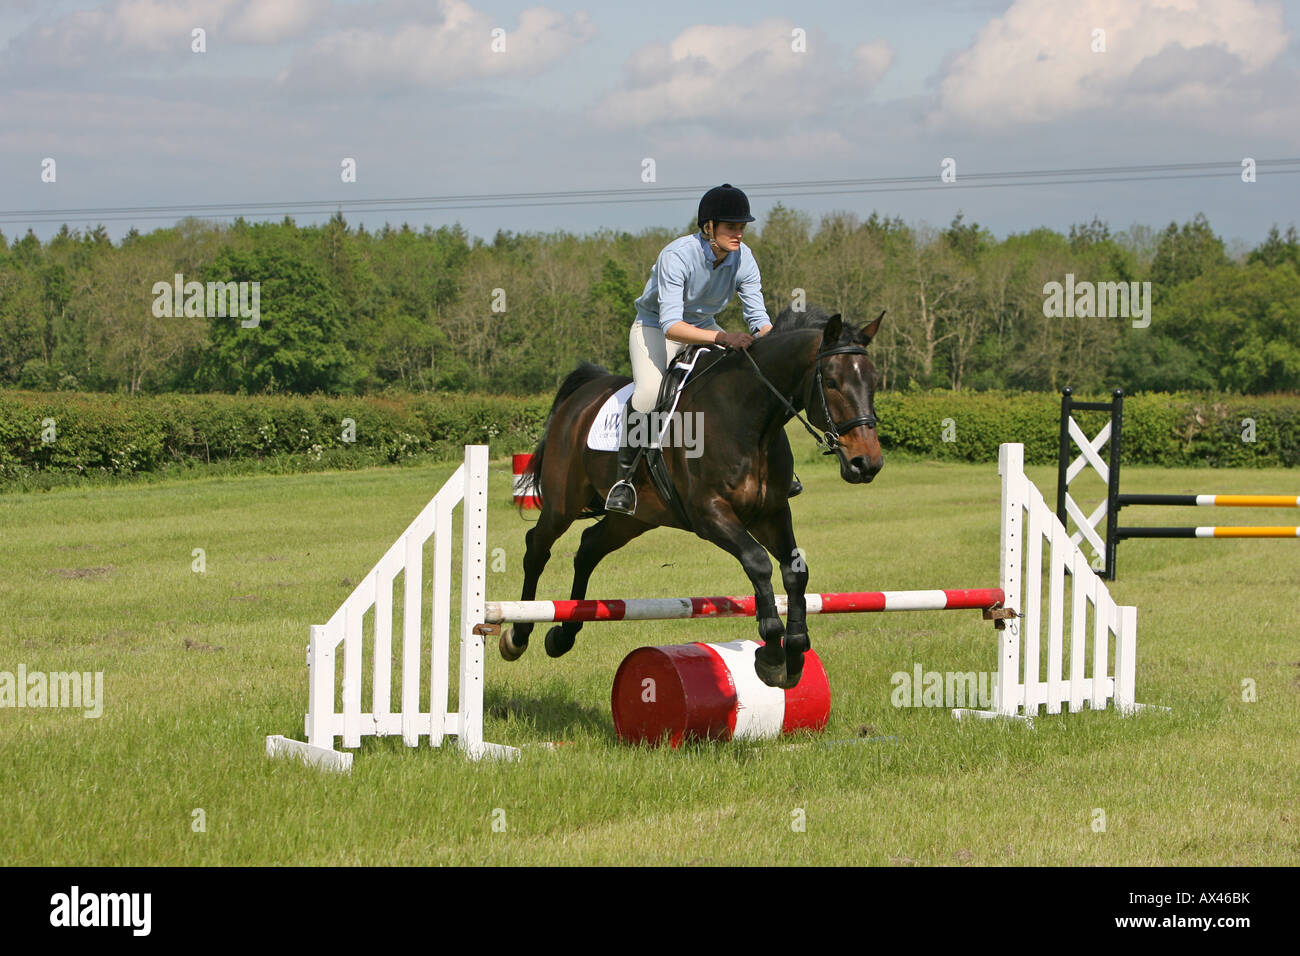 A Woman jumping her Horse in an outdoor riding school. Stock Photo